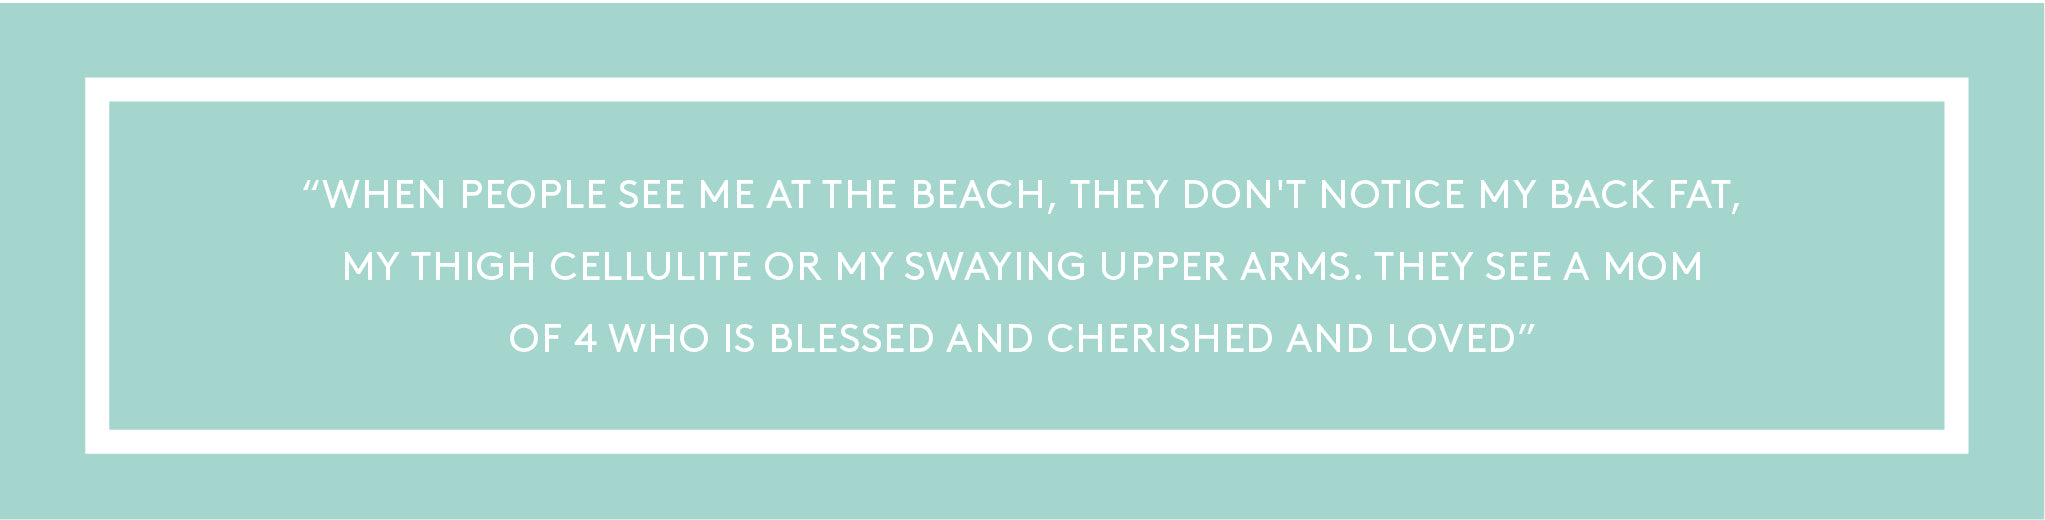 ''When people see me at the beach, they don't notice my back fat, my thigh cellulite or my swaying upper arms. They see a mom of 4 who is blessed and cherished and loved.''